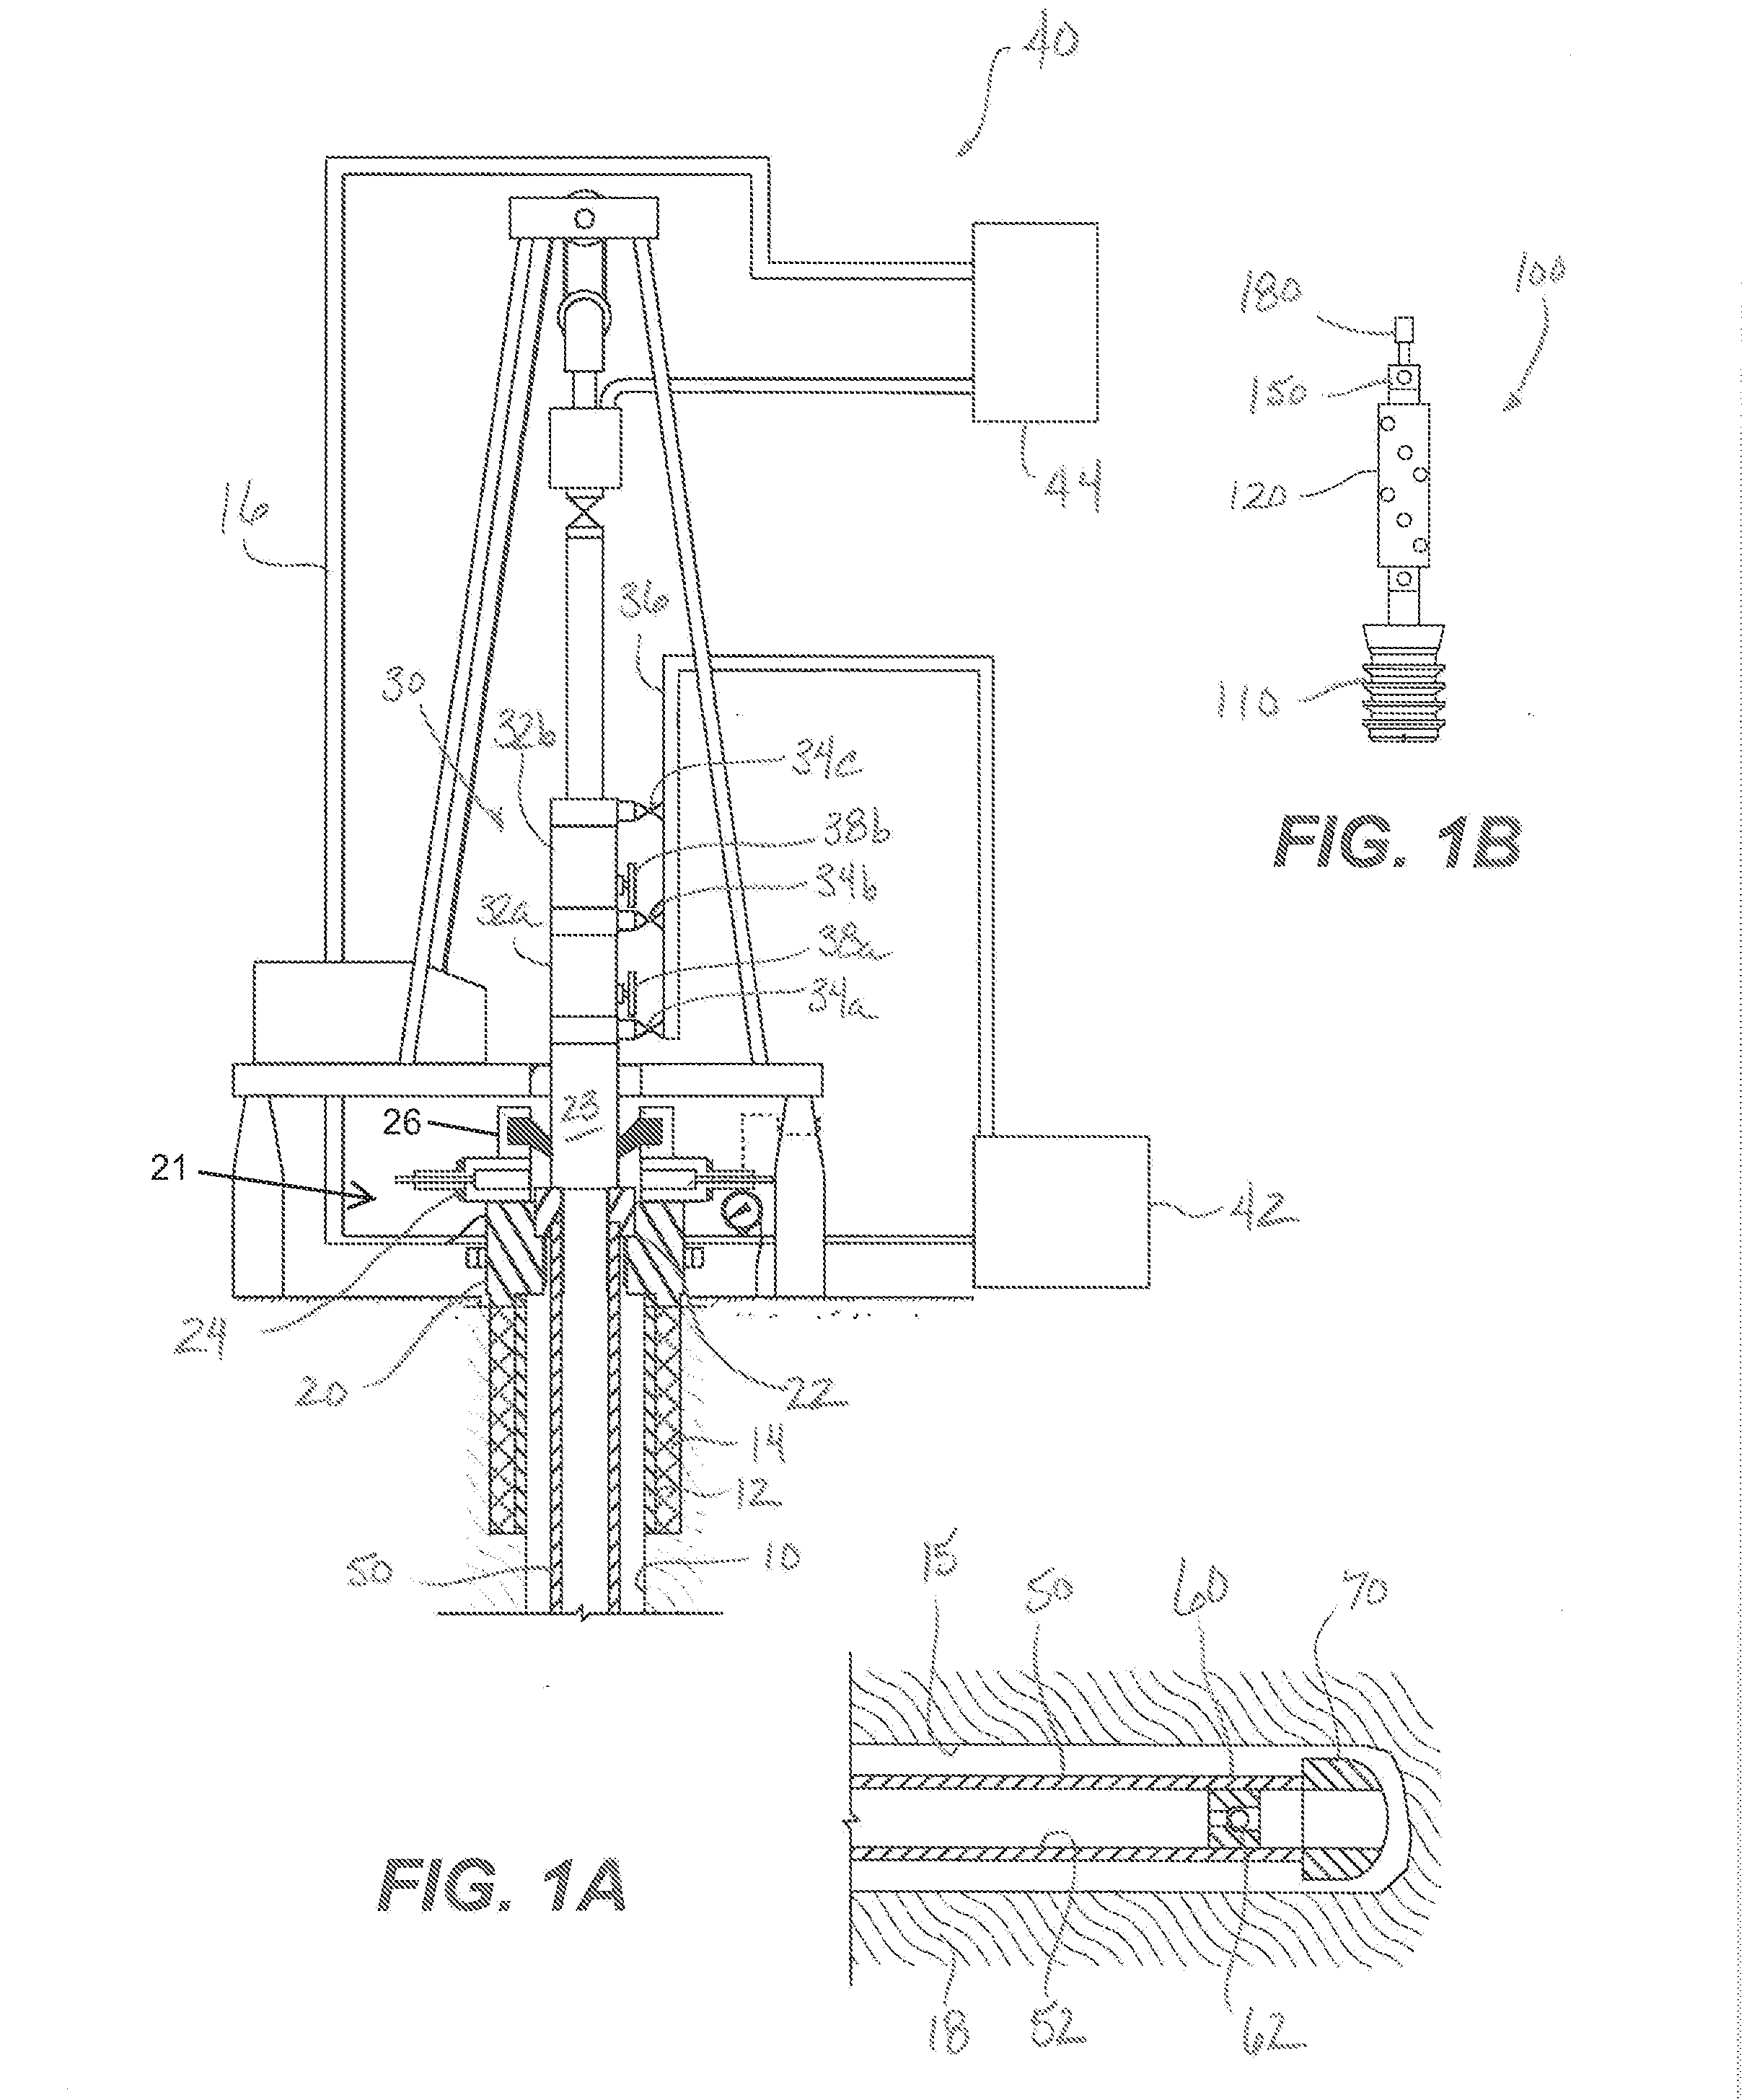 Plug and Gun Apparatus and Method for Cementing and Perforating Casing